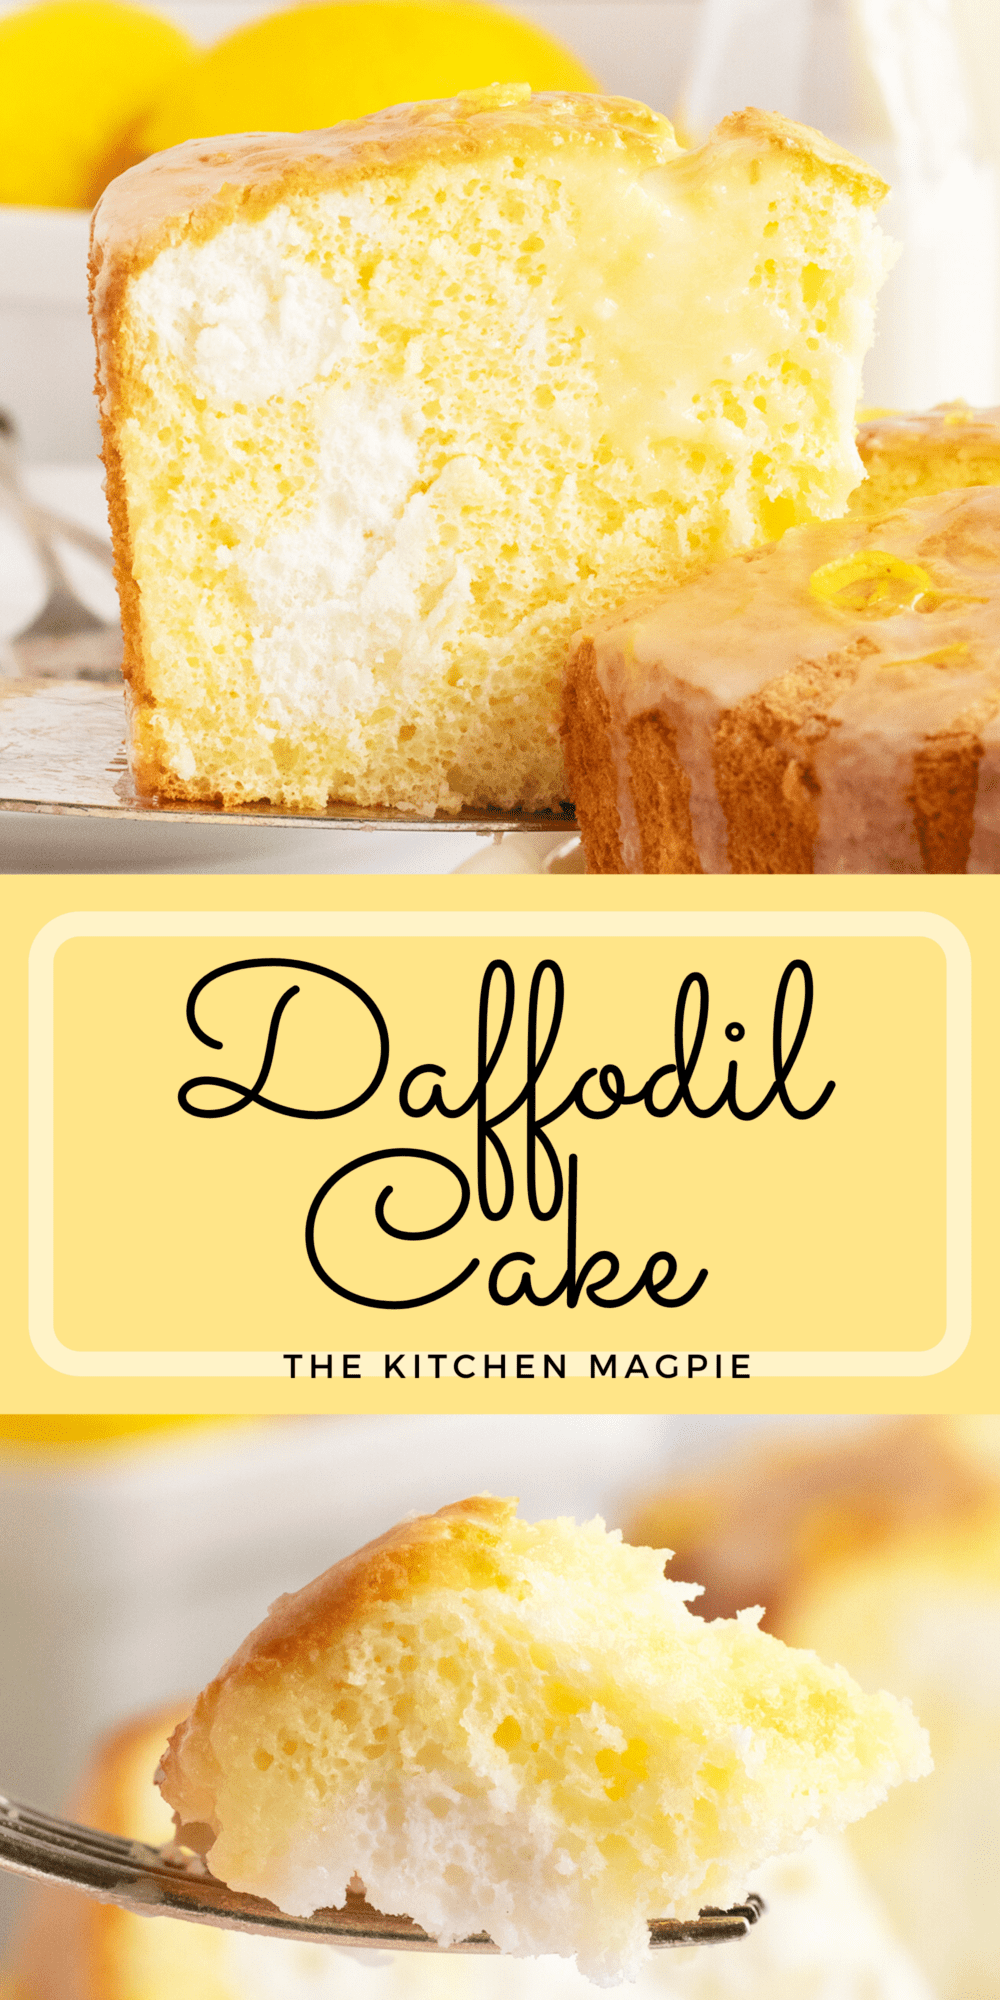 A beautiful yellow and white cake that is light and fluffy with a light lemon glaze.